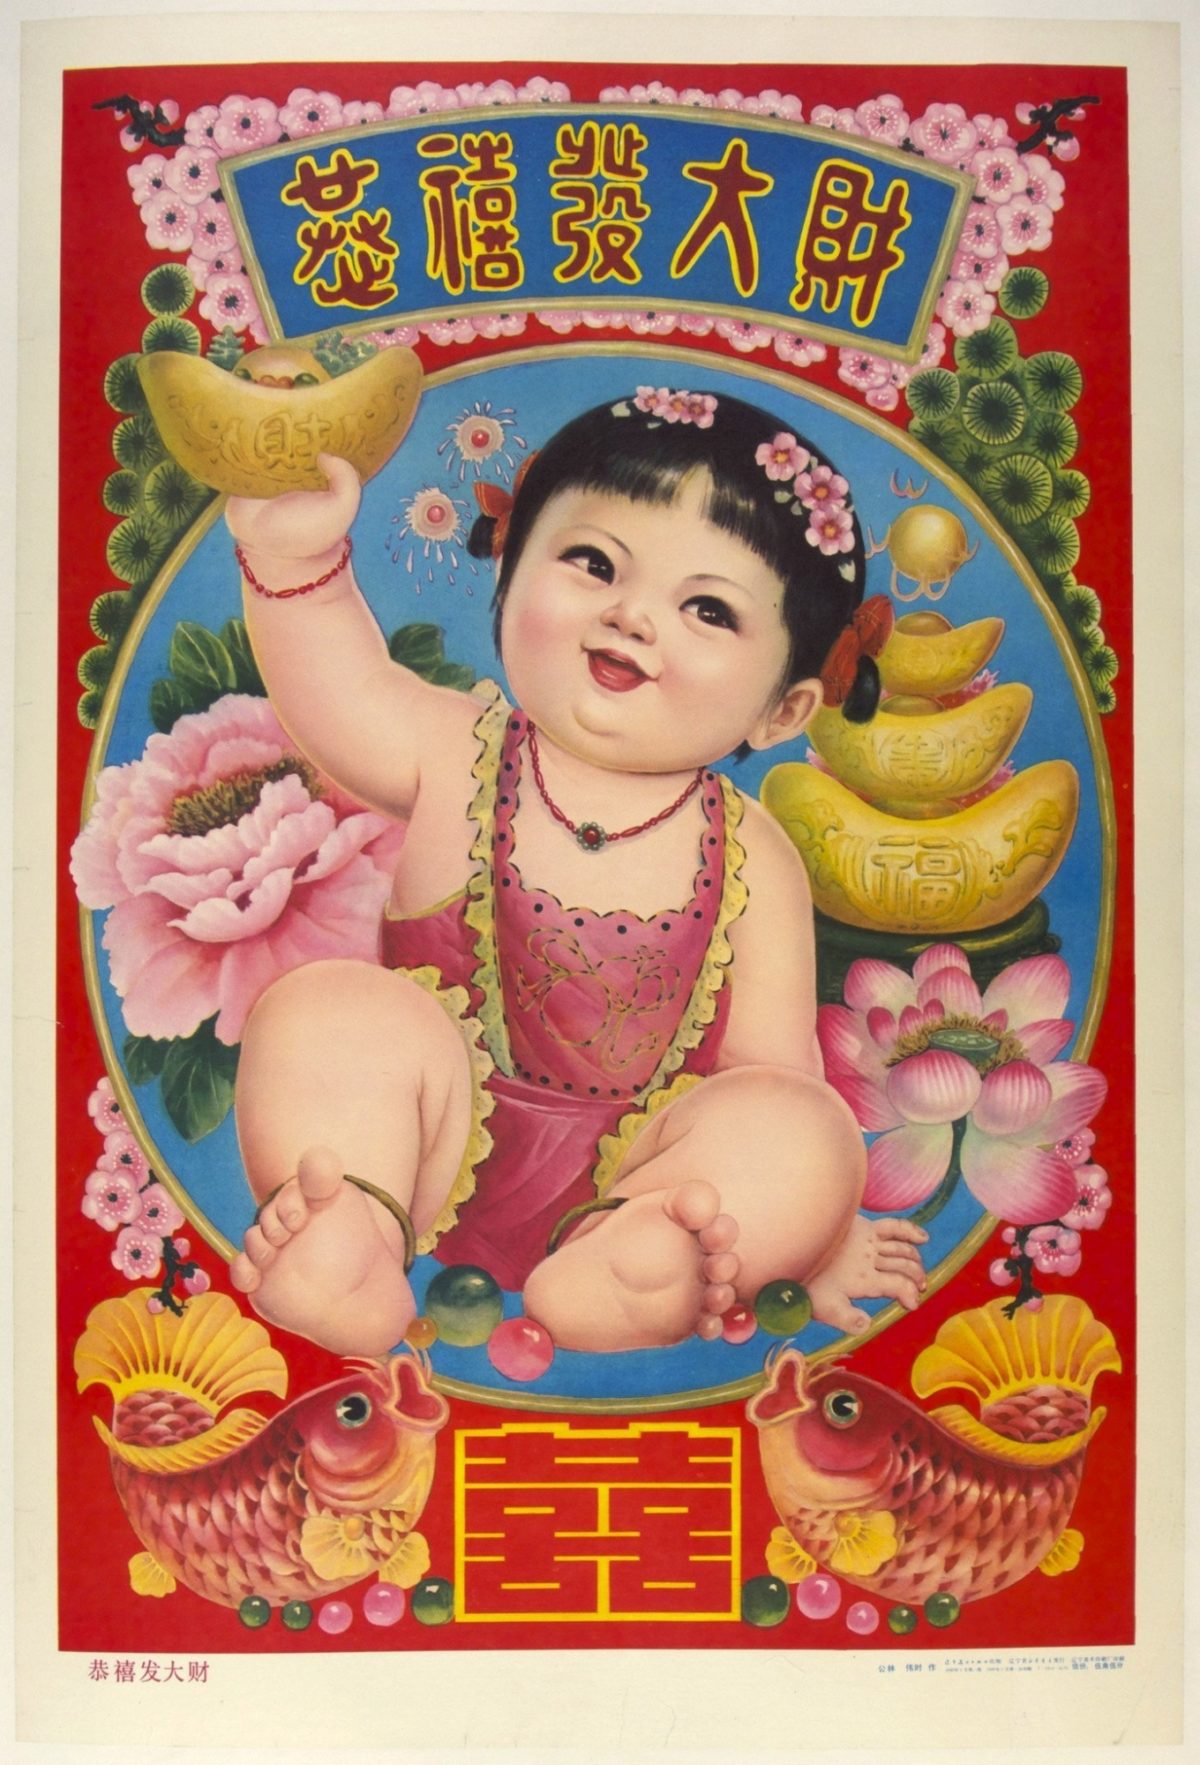 A red poster of a baby holding a gold object as pink flowers, red fish, and gold surround her.